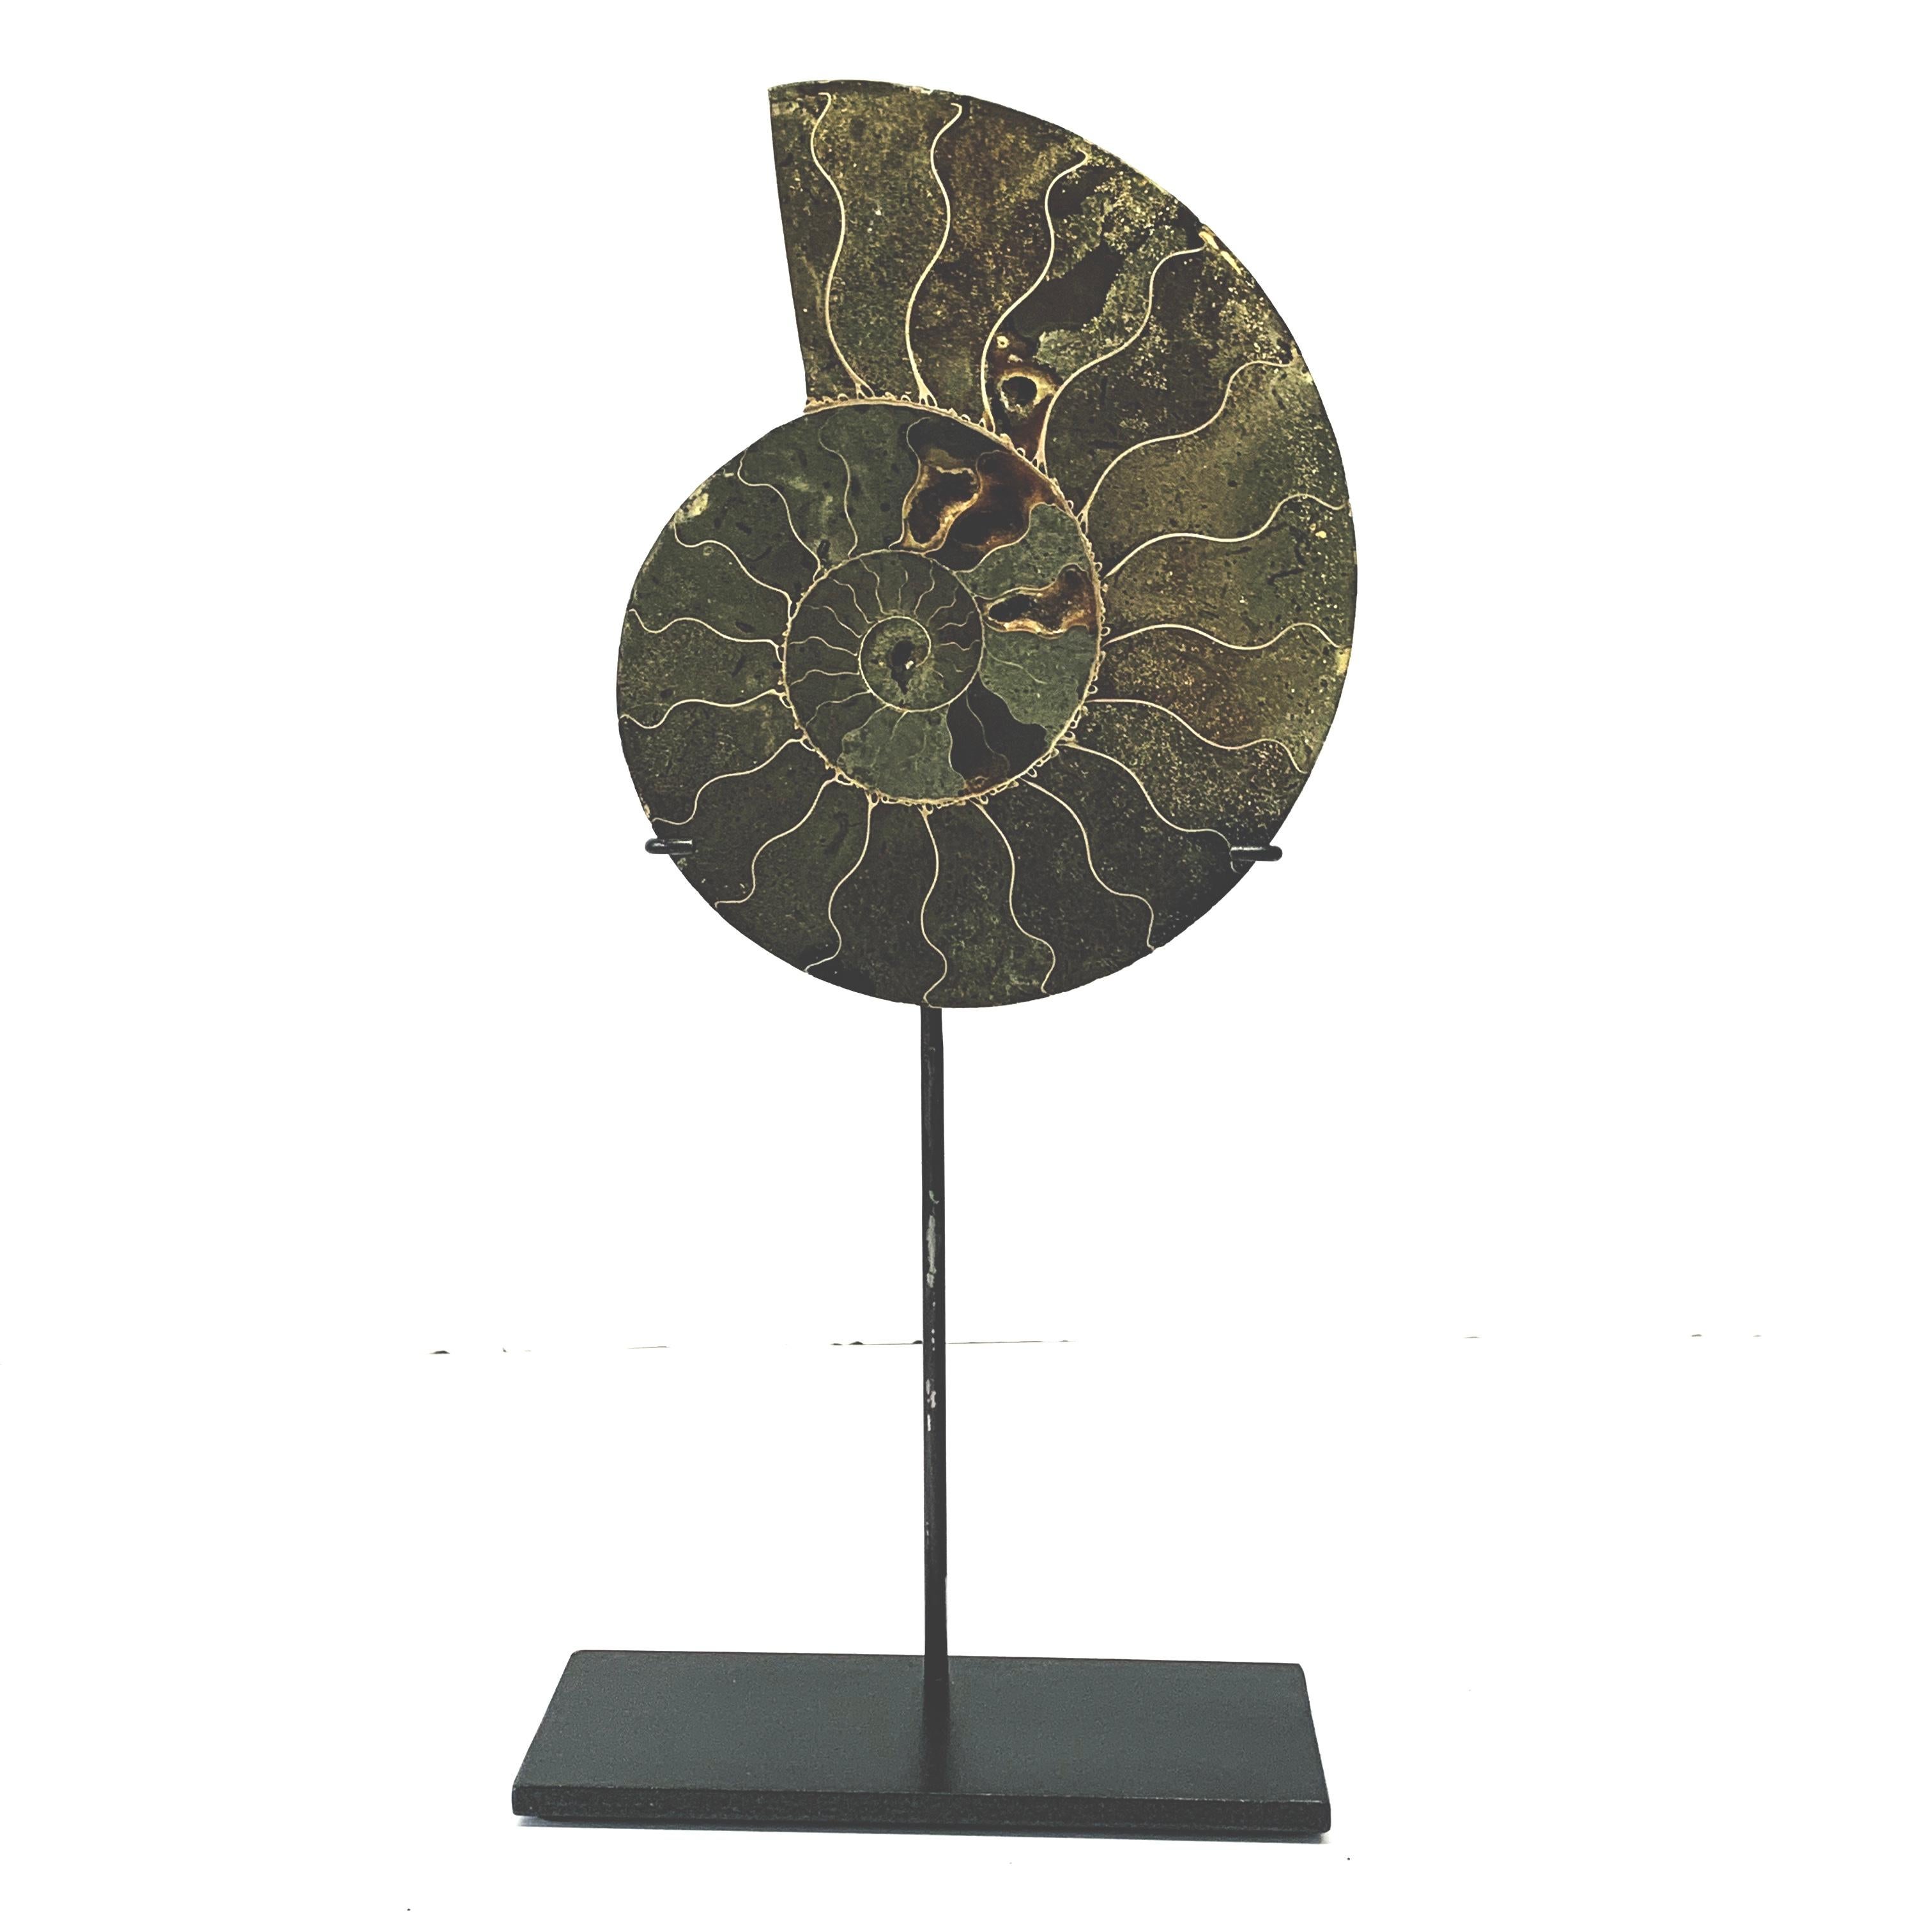 Pair of polished ammonite sculptures from Madagascar
Custom steel stand
One of many from a large collection
Measures: Ammonite A 5.5